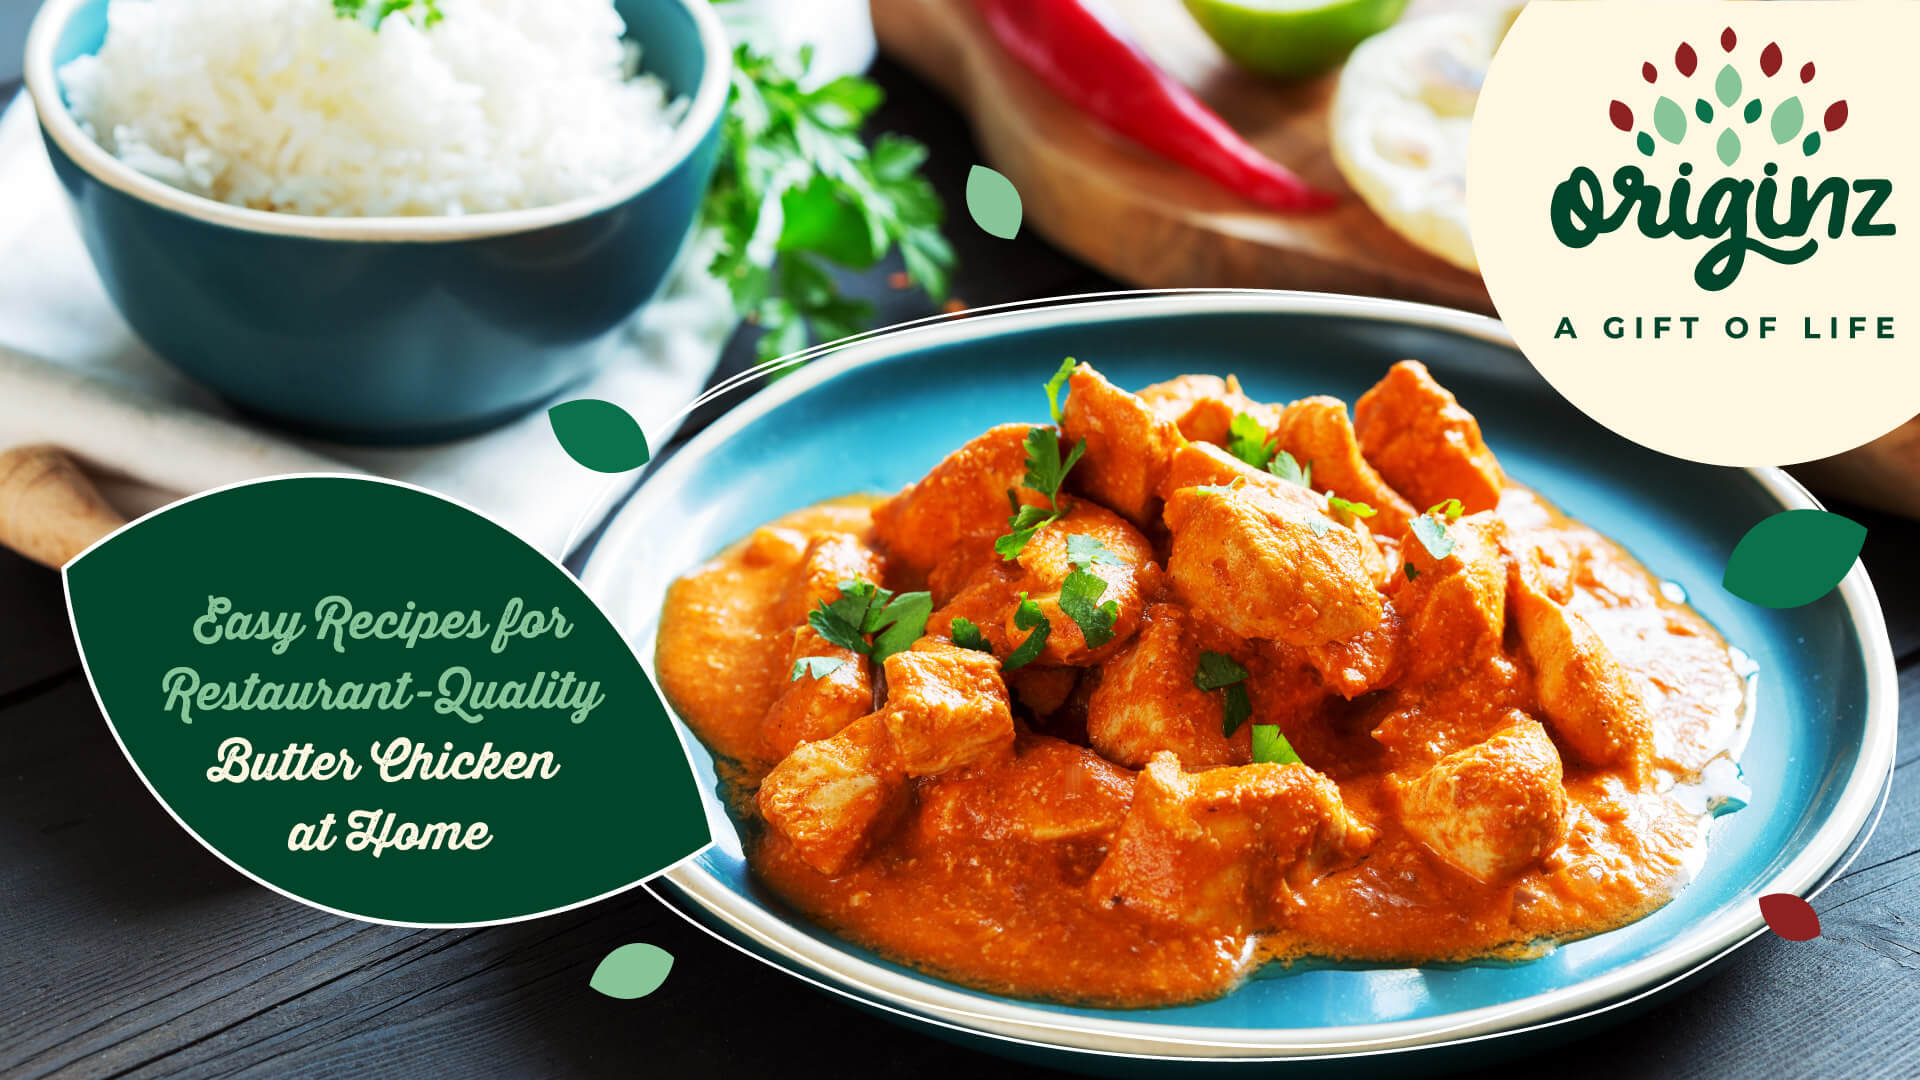 Easy Recipes for Restaurant-Quality Butter Chicken at Home